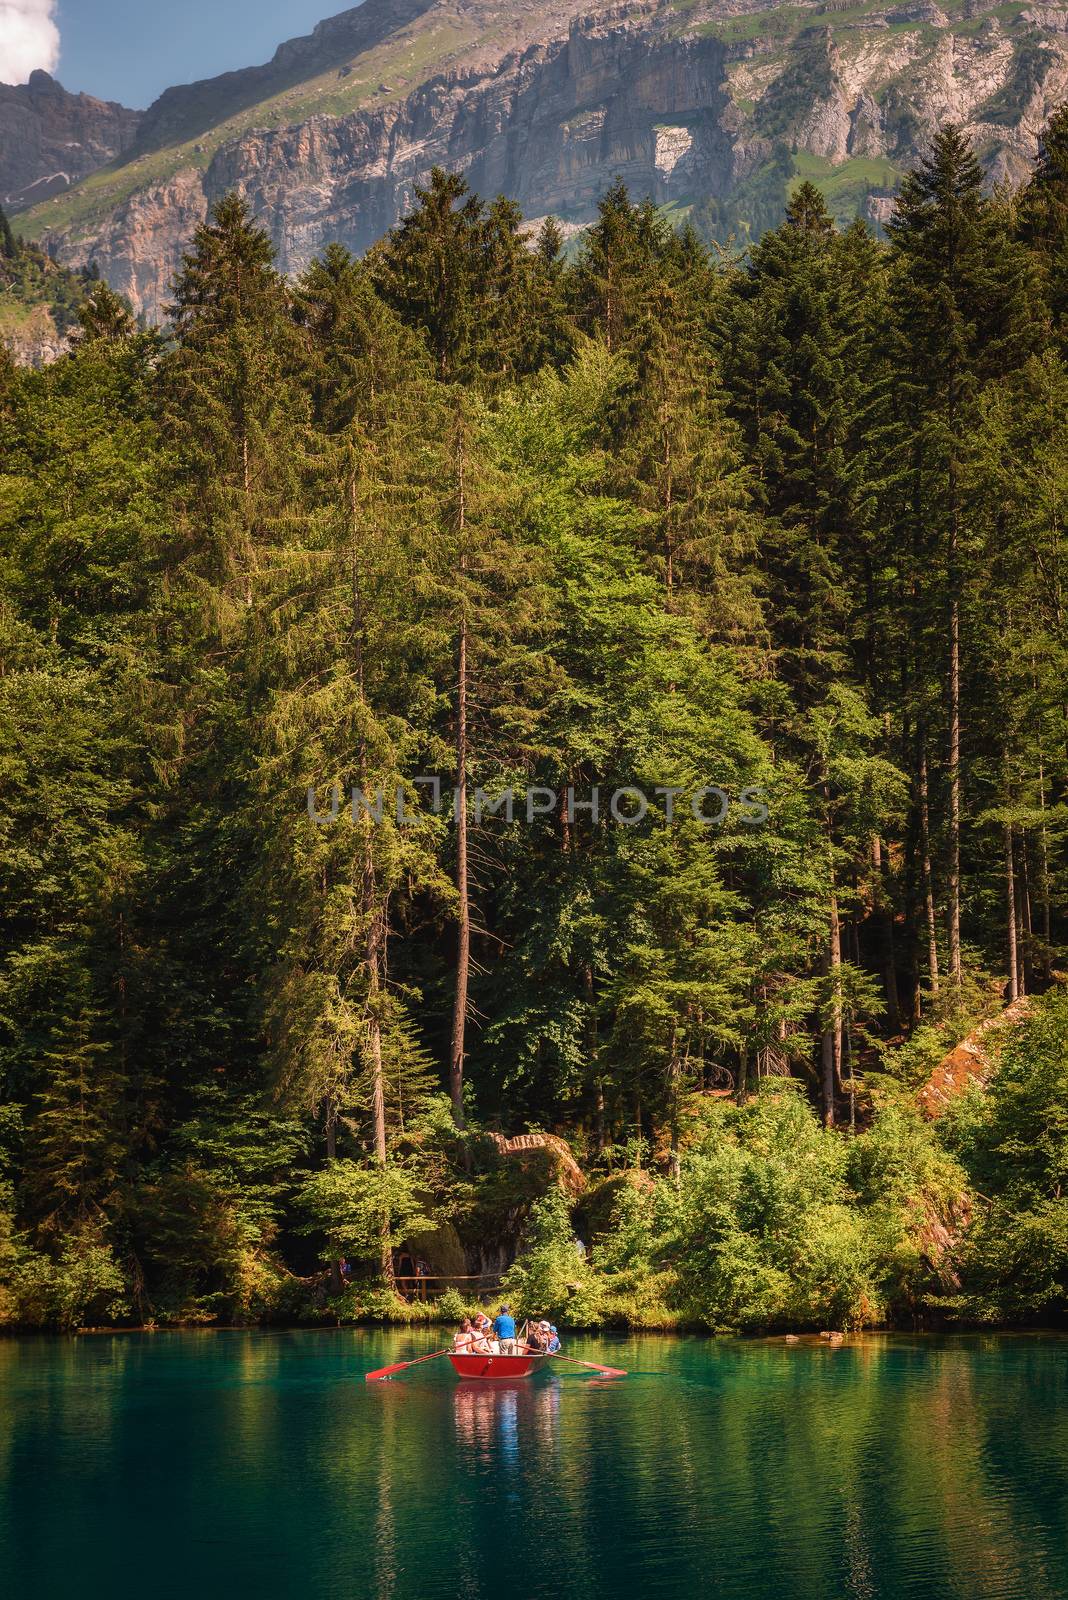 Blausee Lake, Switzerland - July 23, 2019 : Tourists taking a boat trip on Blausee Lake located in the Kander valley above Kandergrund.